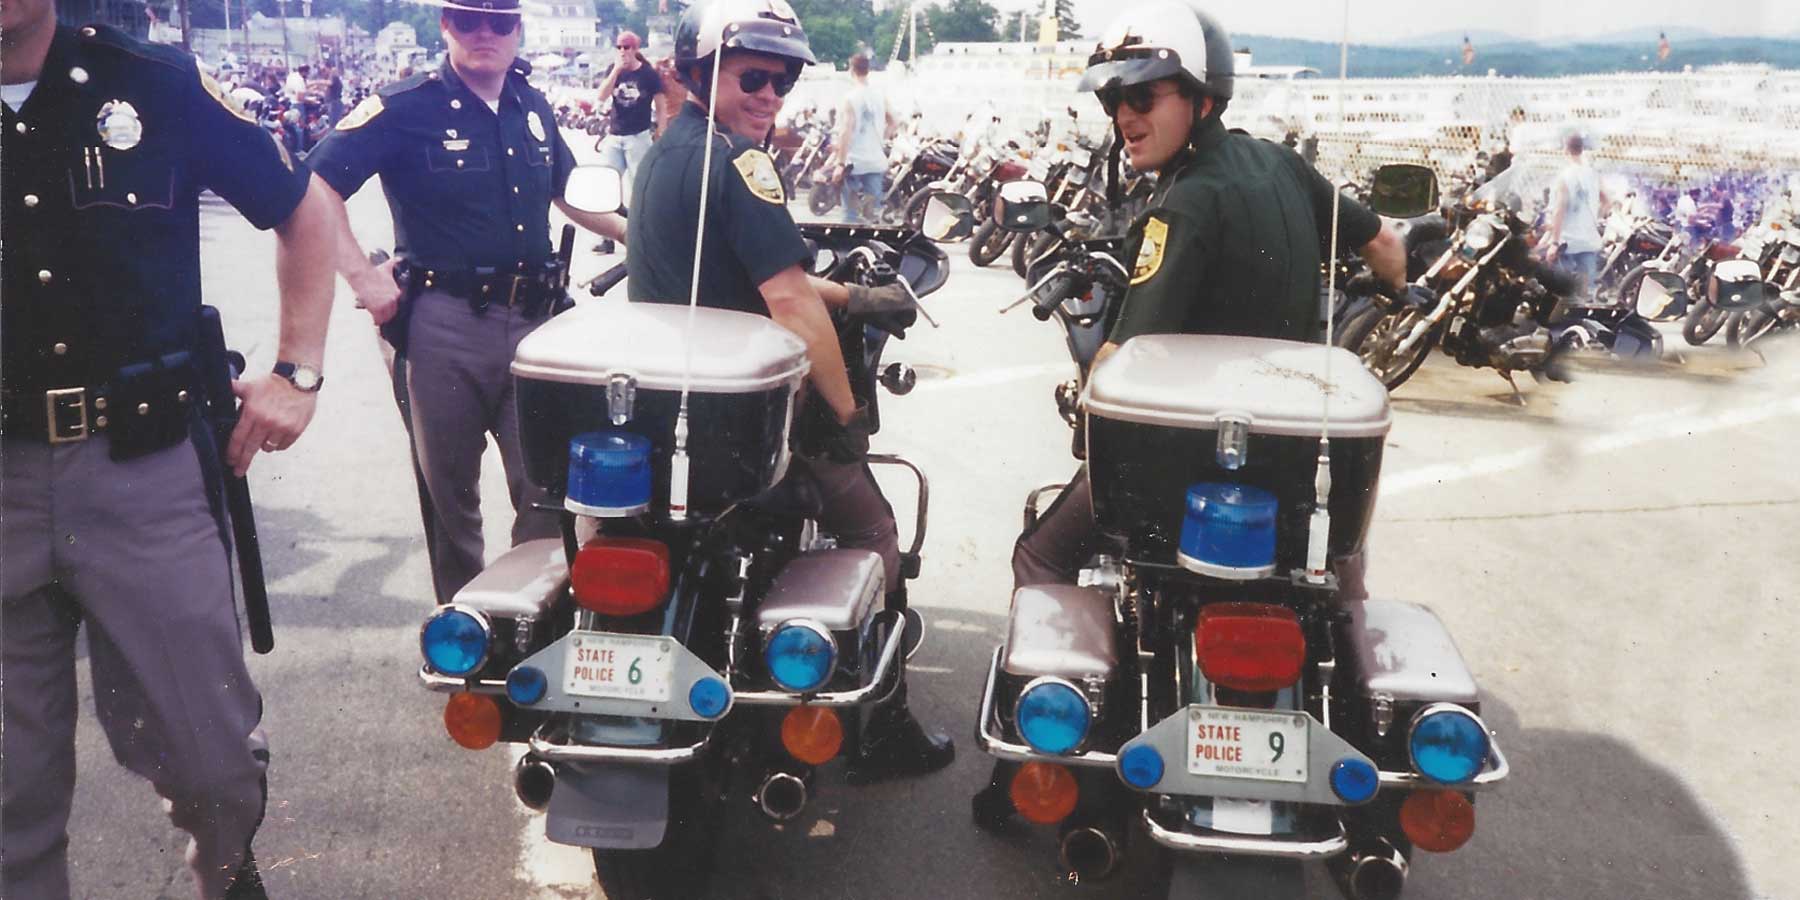 police motorcycles and troopers